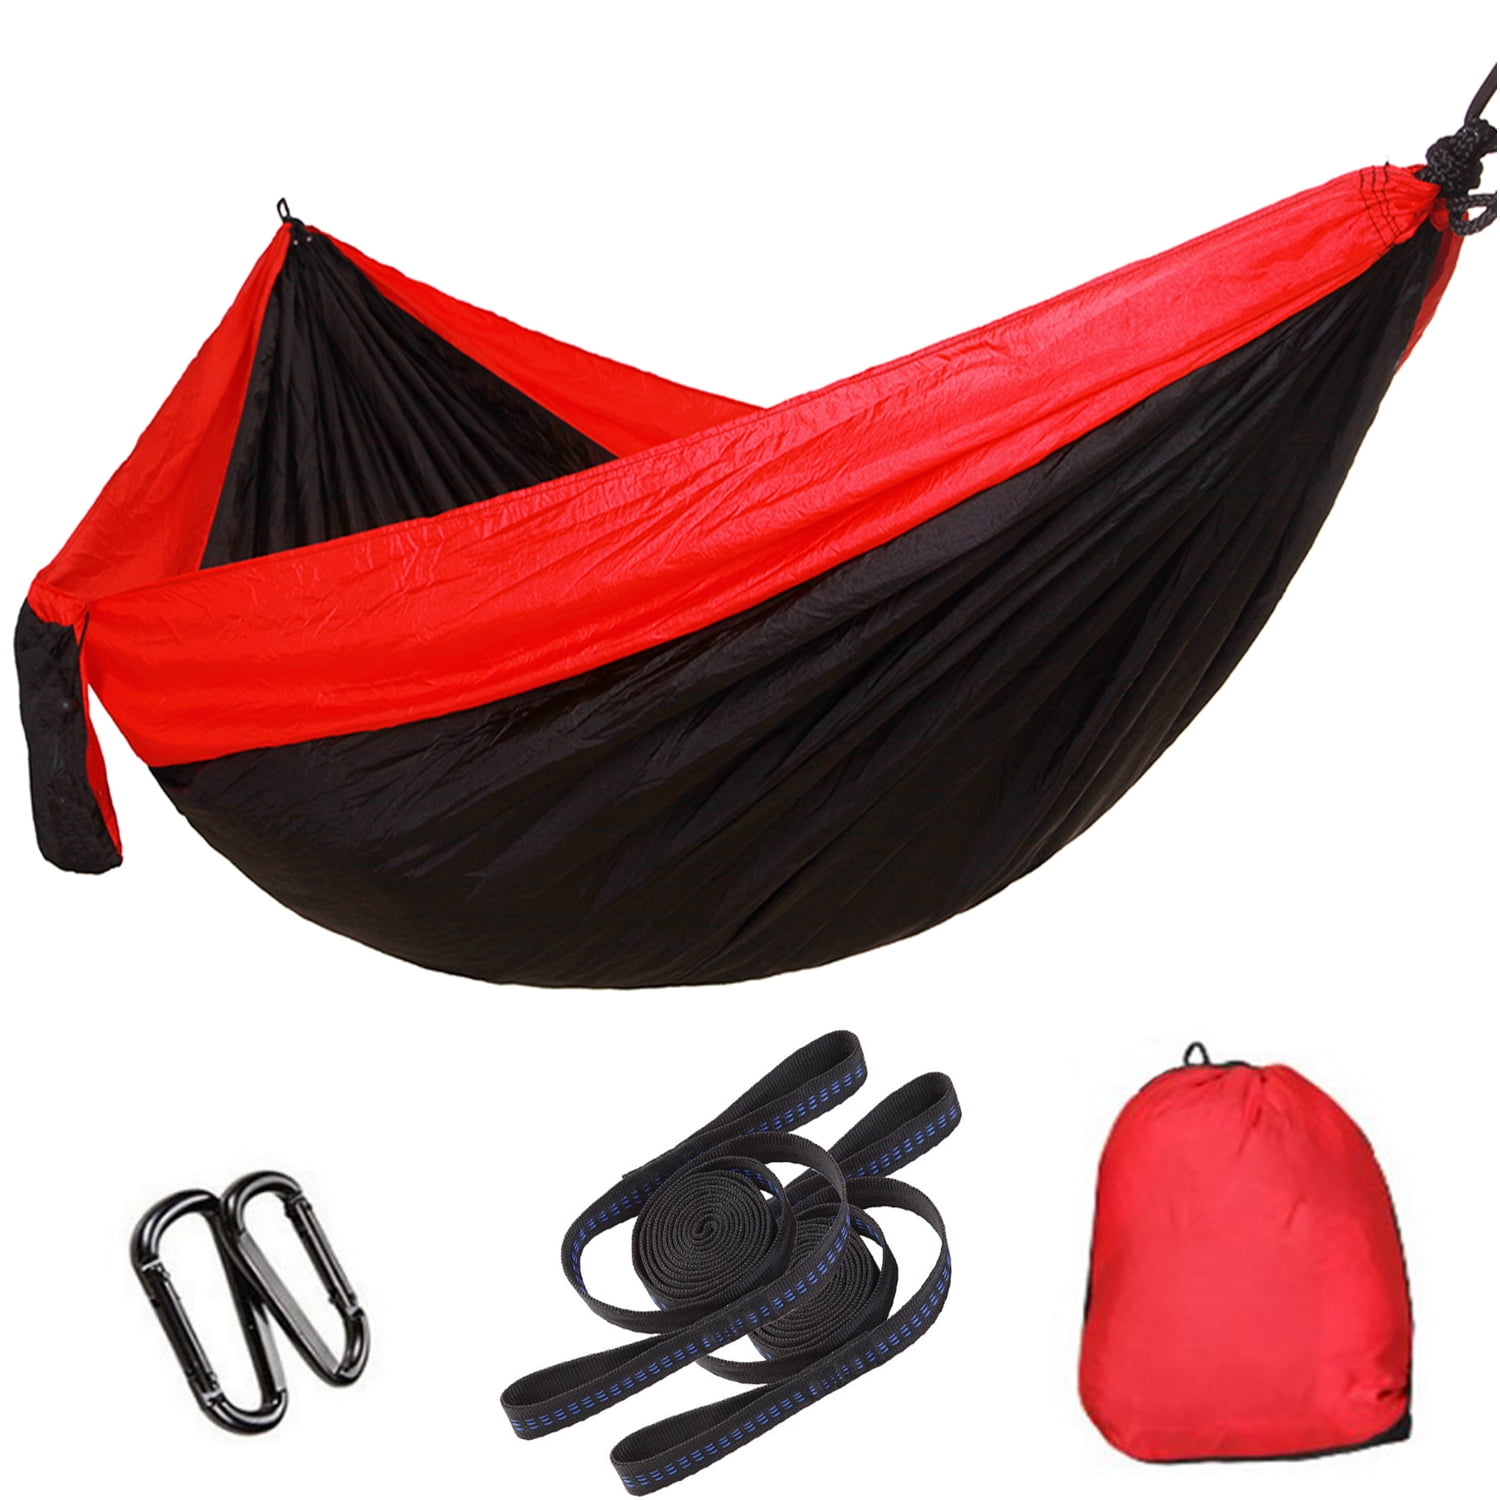 Beach Camping Travel Parachute Double Hammock for Backpacking Portable Lightweight Nylon Hammock TAKEBEST Double Camping Hammock Yard and Garden 